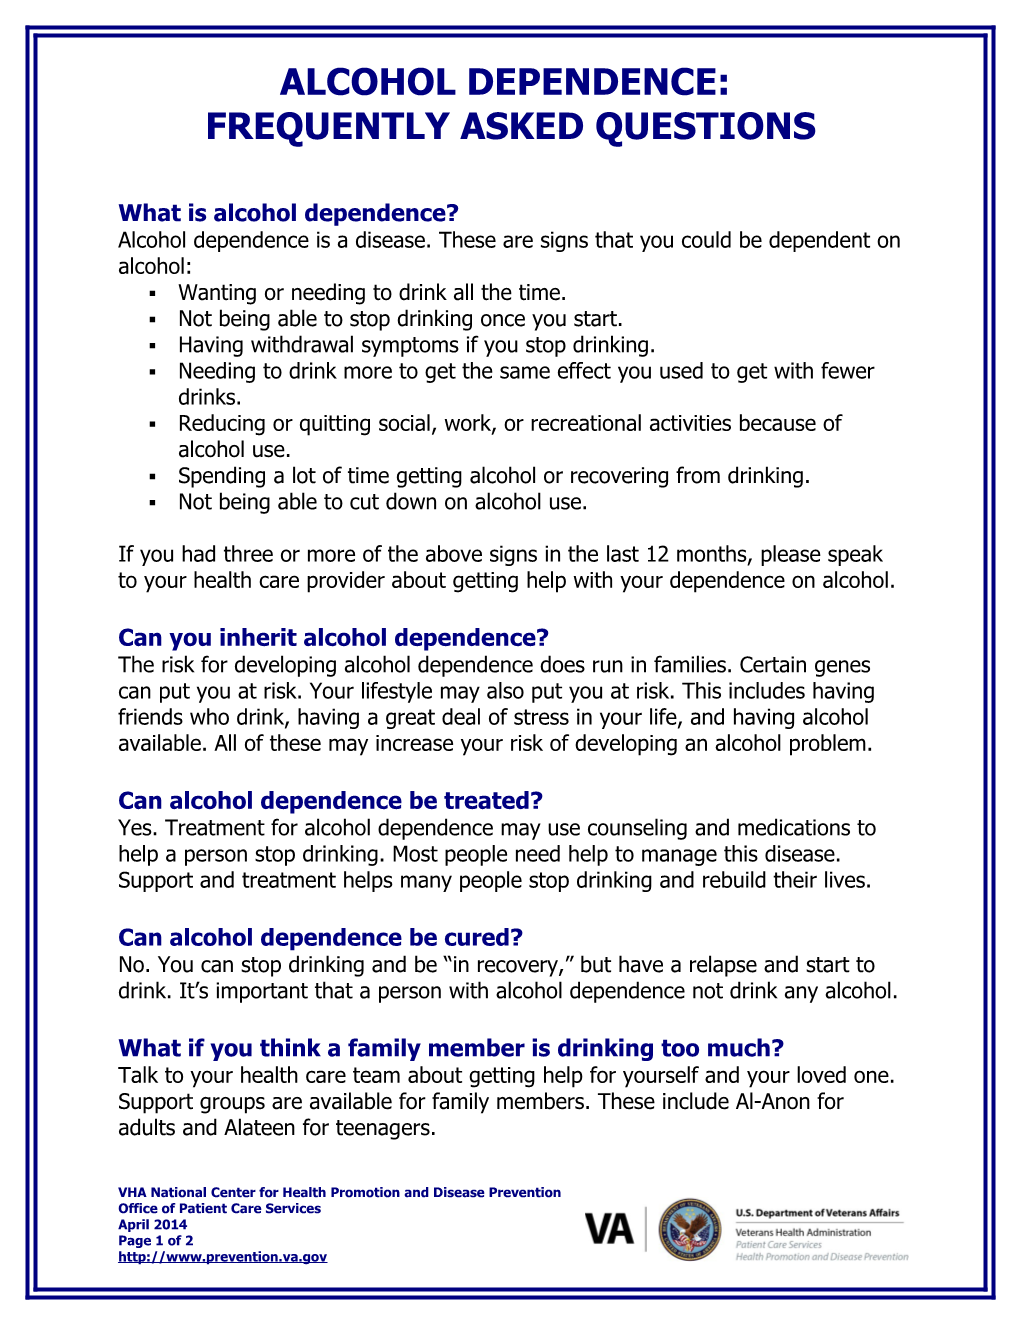 Alcohol Abuse and Dependence -FAQ (Department of Veterans Affairs)